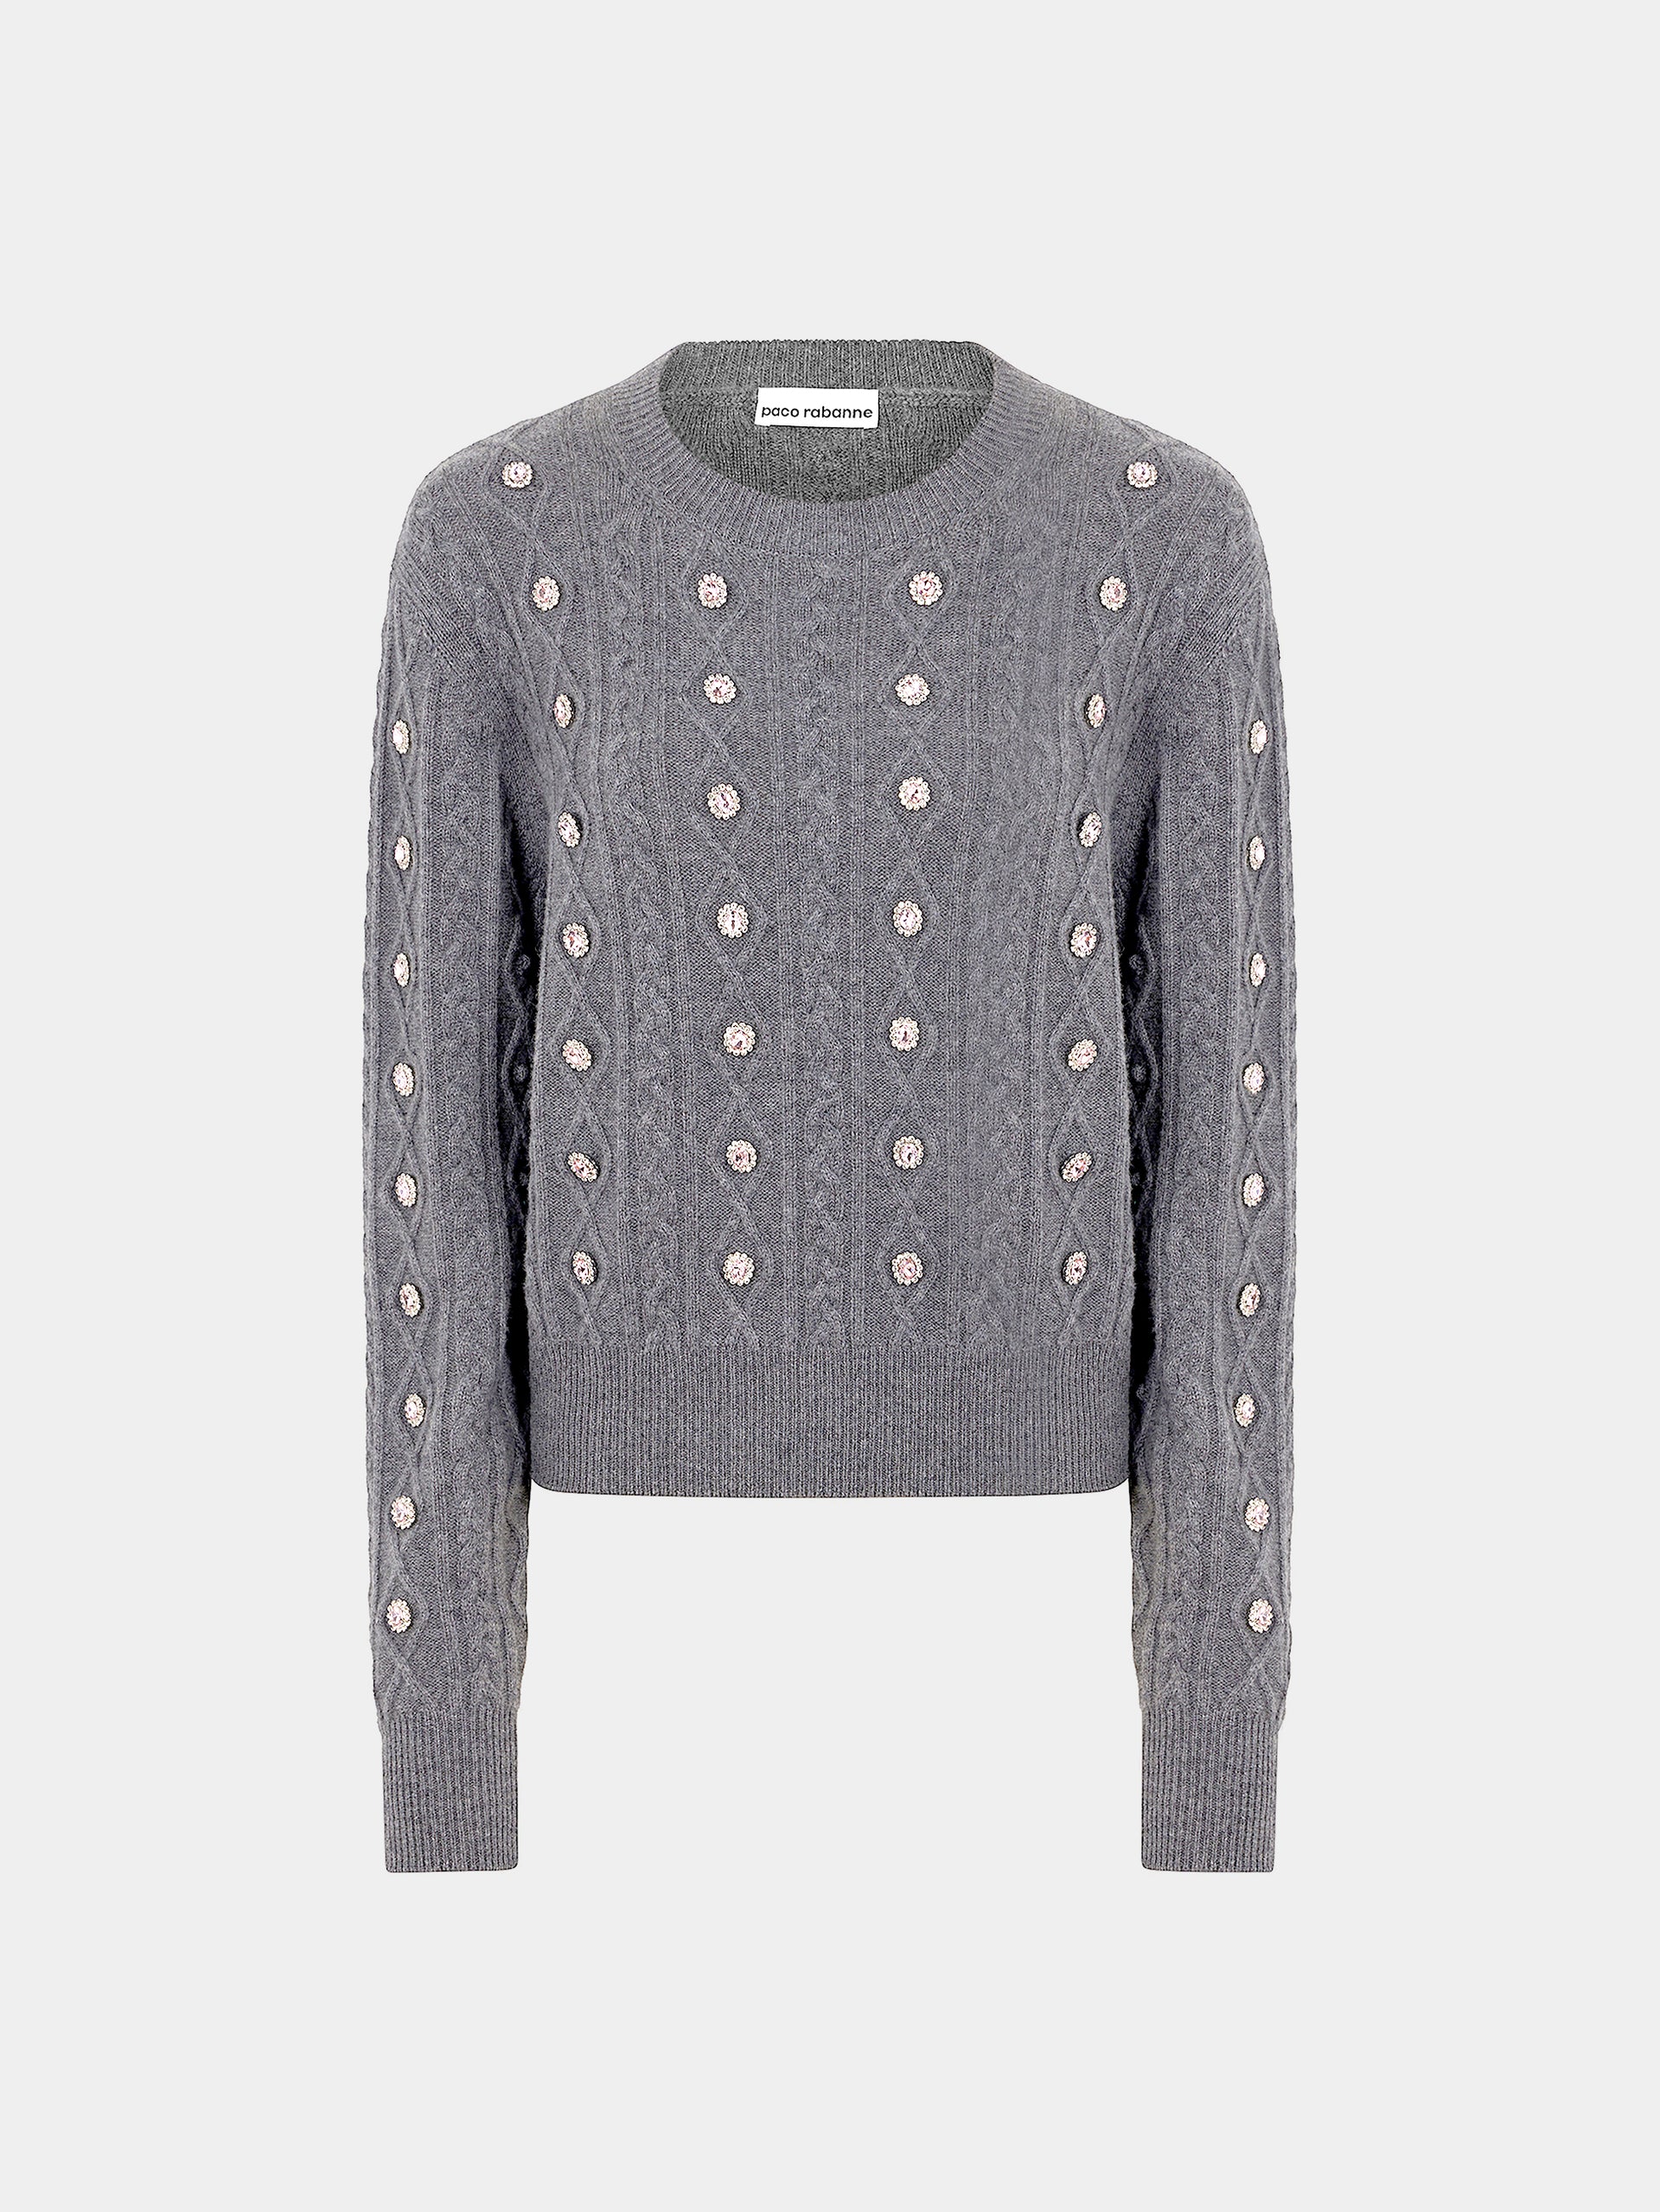 Wool and cashmere sweater adorned with crystals